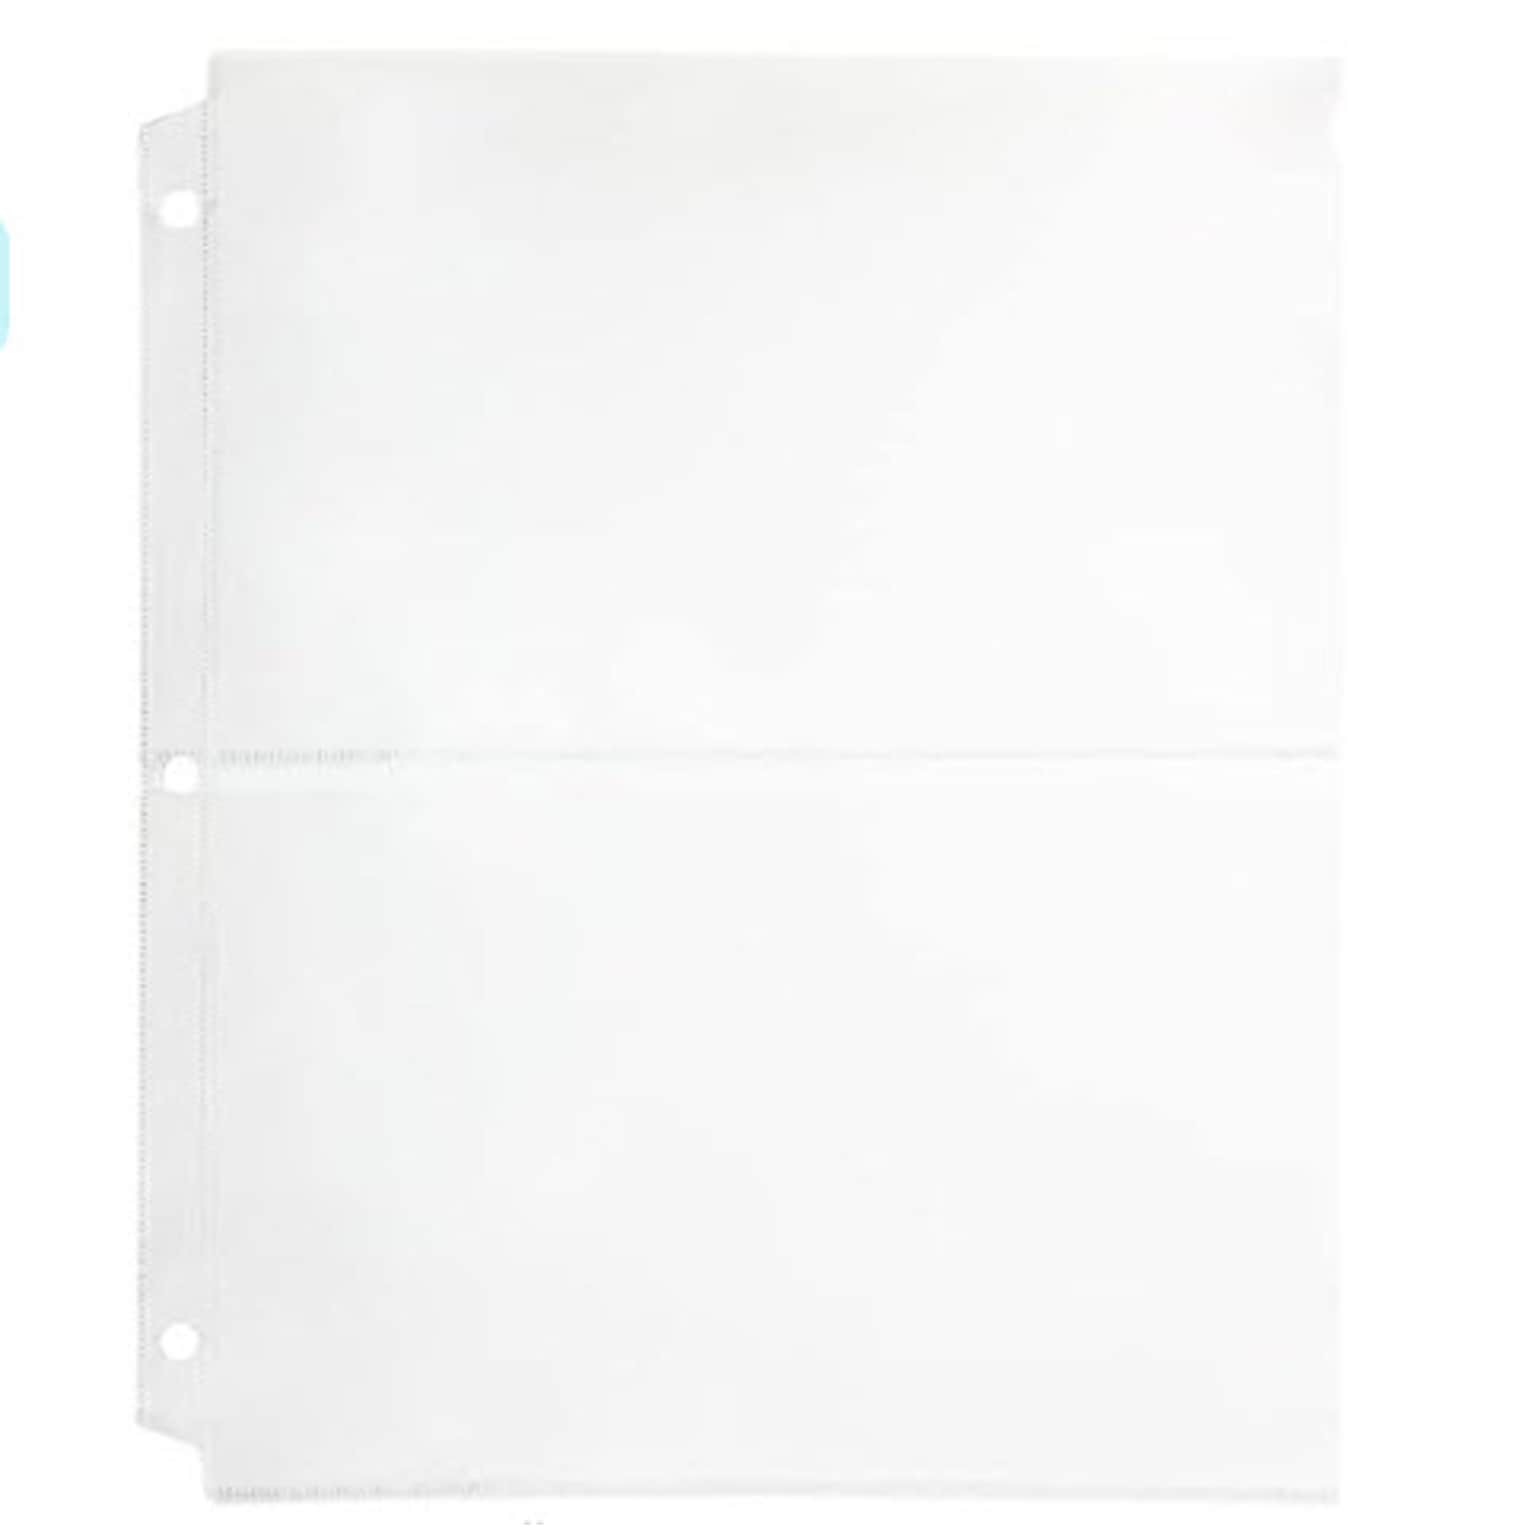 JAM Paper Plastic Binder Collection Pages, 9 1/8 x 11 3/8, 20 Sheets/Pack (287658323A)